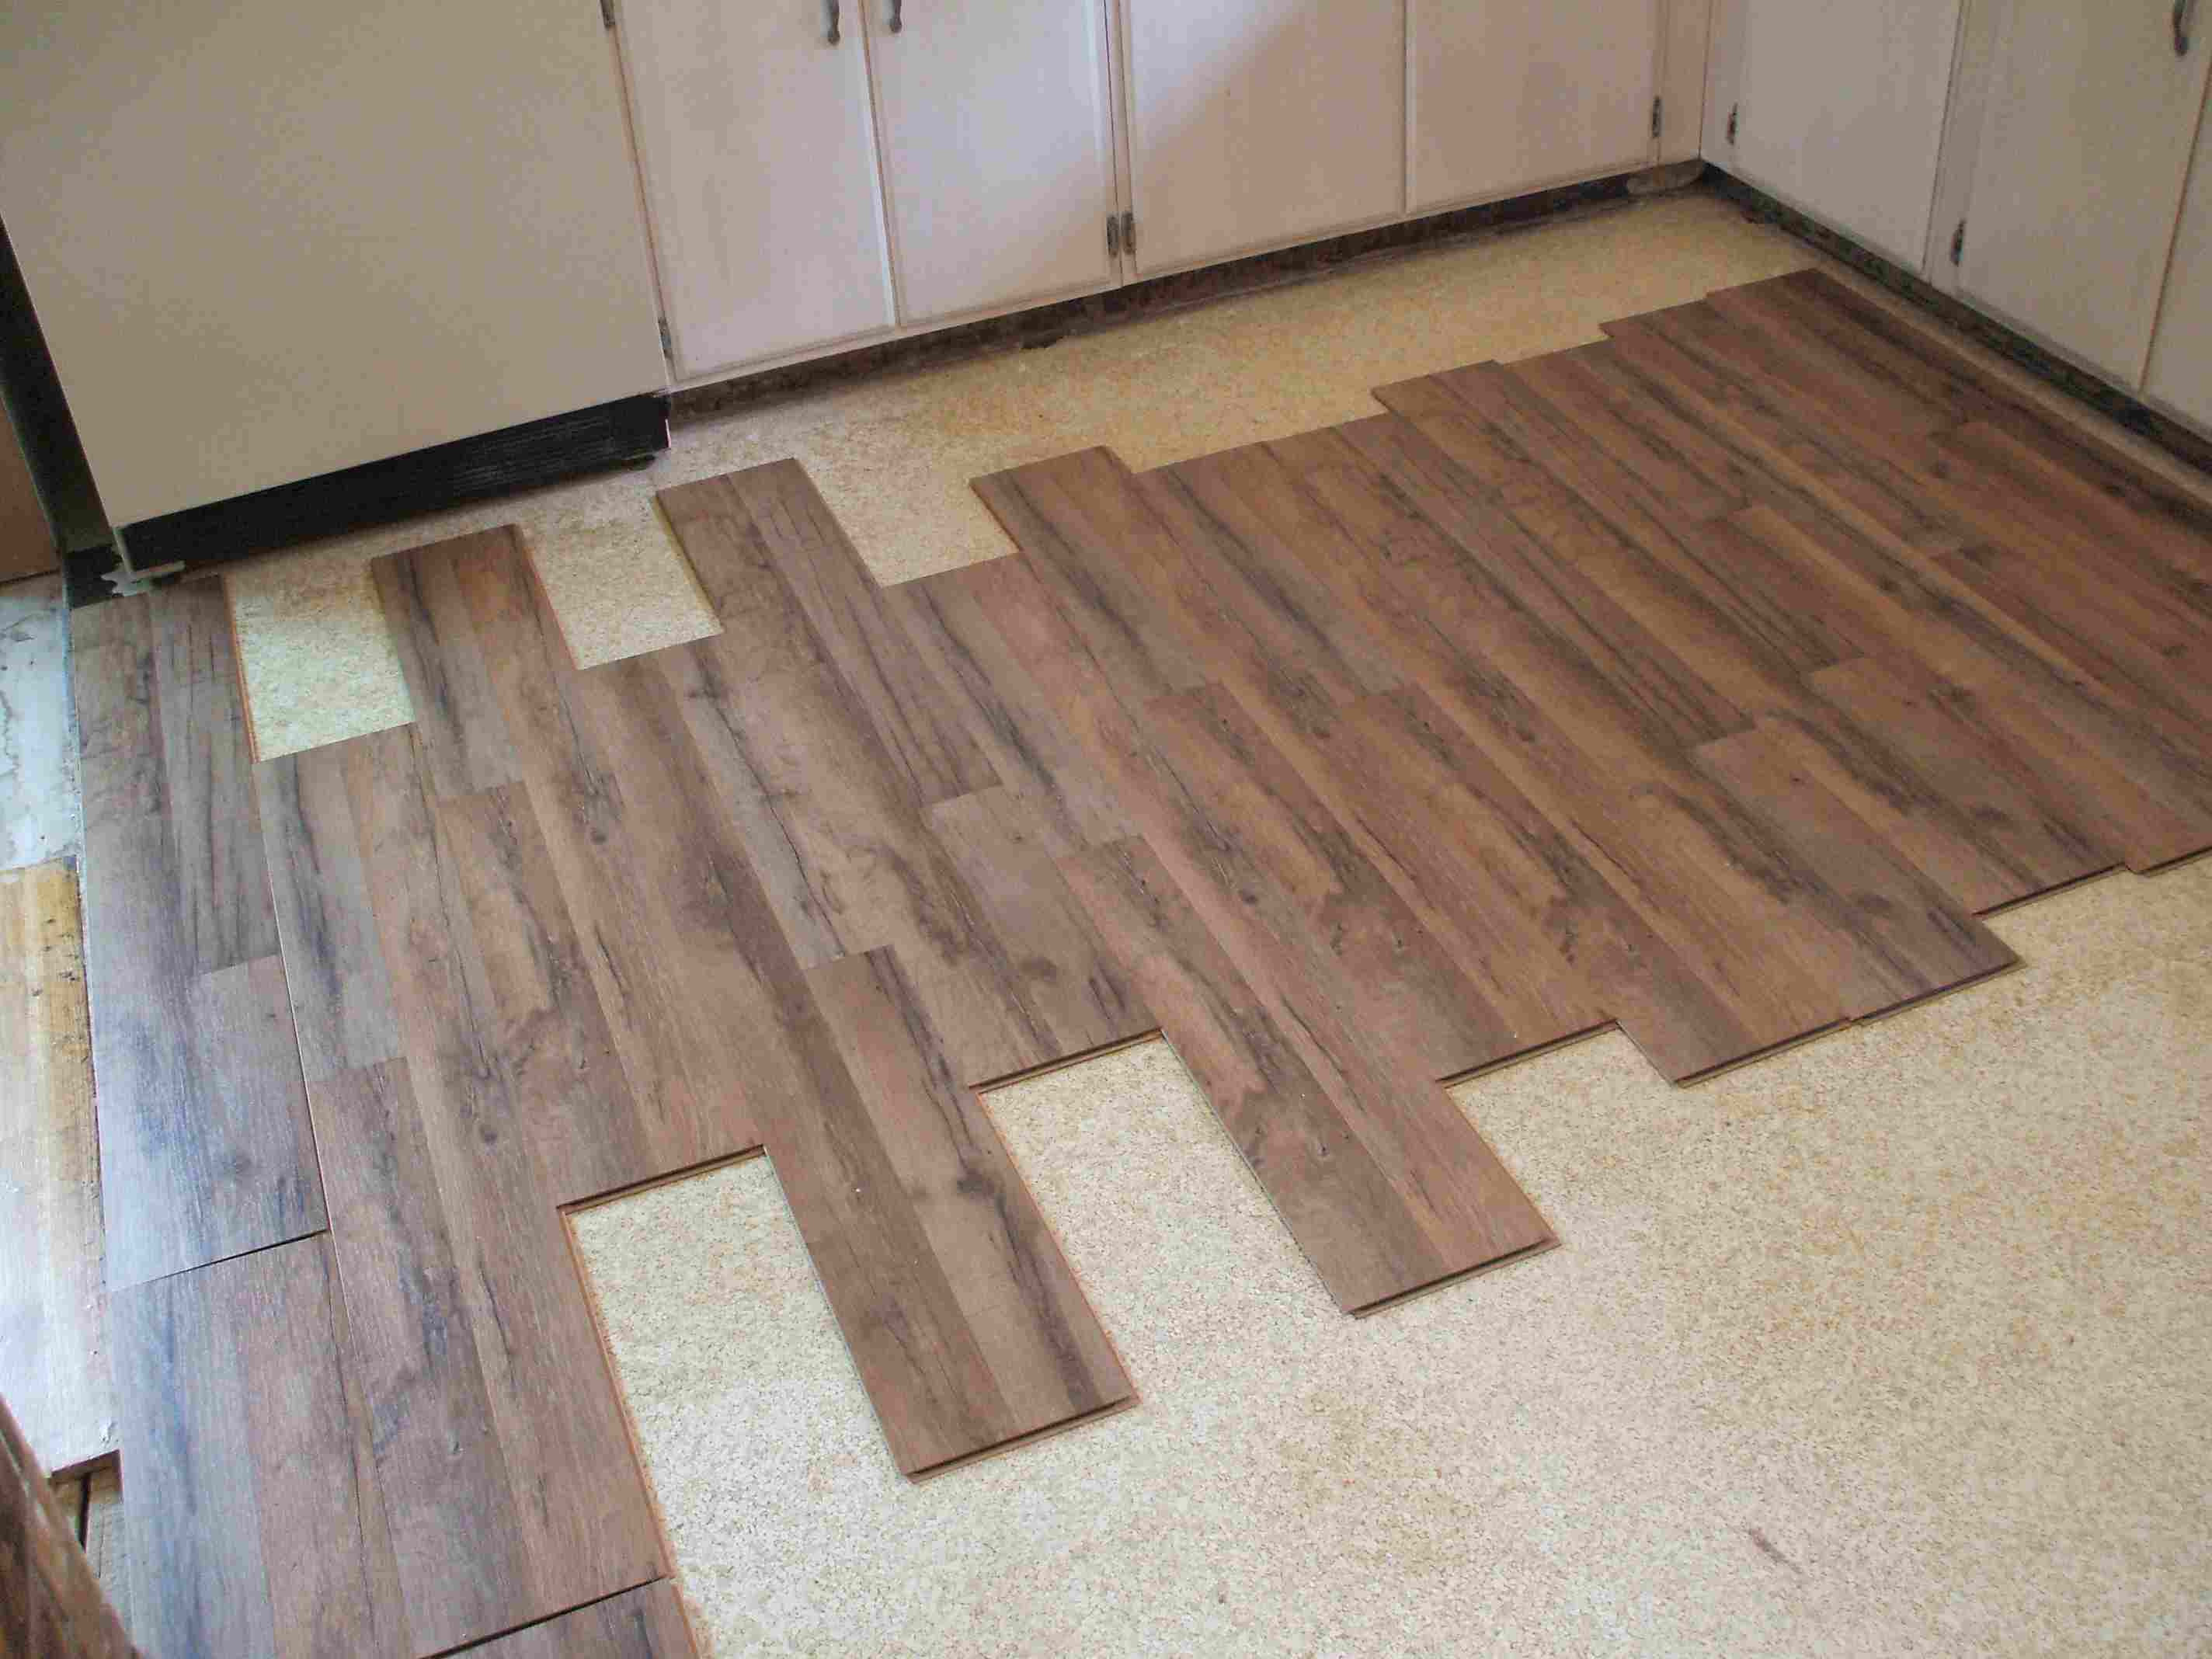 10 Recommended Hardwood Flooring Faq 2024 free download hardwood flooring faq of faux wood floor installation luxury engaging discount hardwood with faux wood floor installation unique how to lay laminate flooring in e day of faux wood